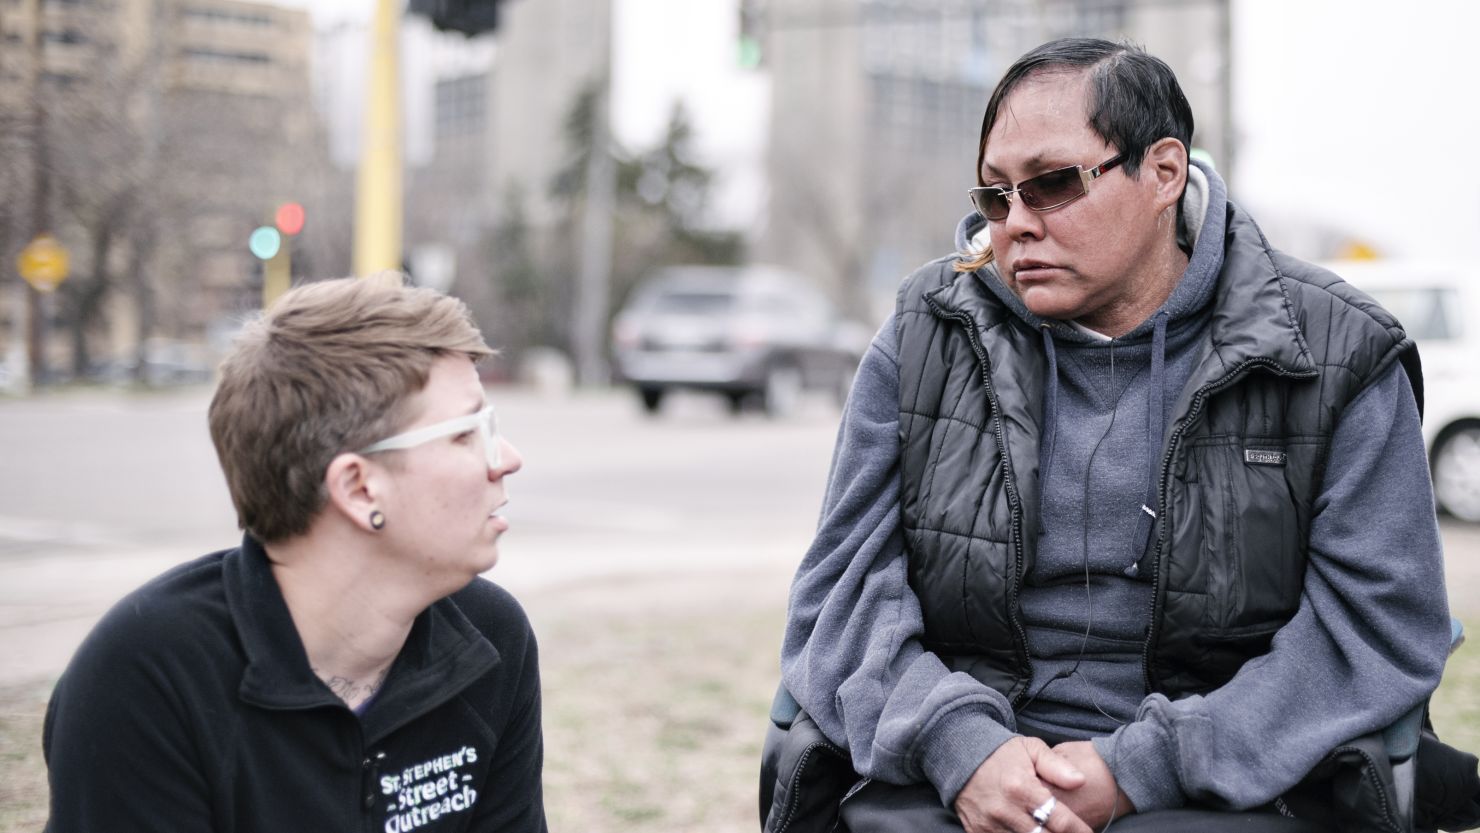 St. Stephen's Humans Services provides resources to those experiencing homelessness in Minneapolis. 